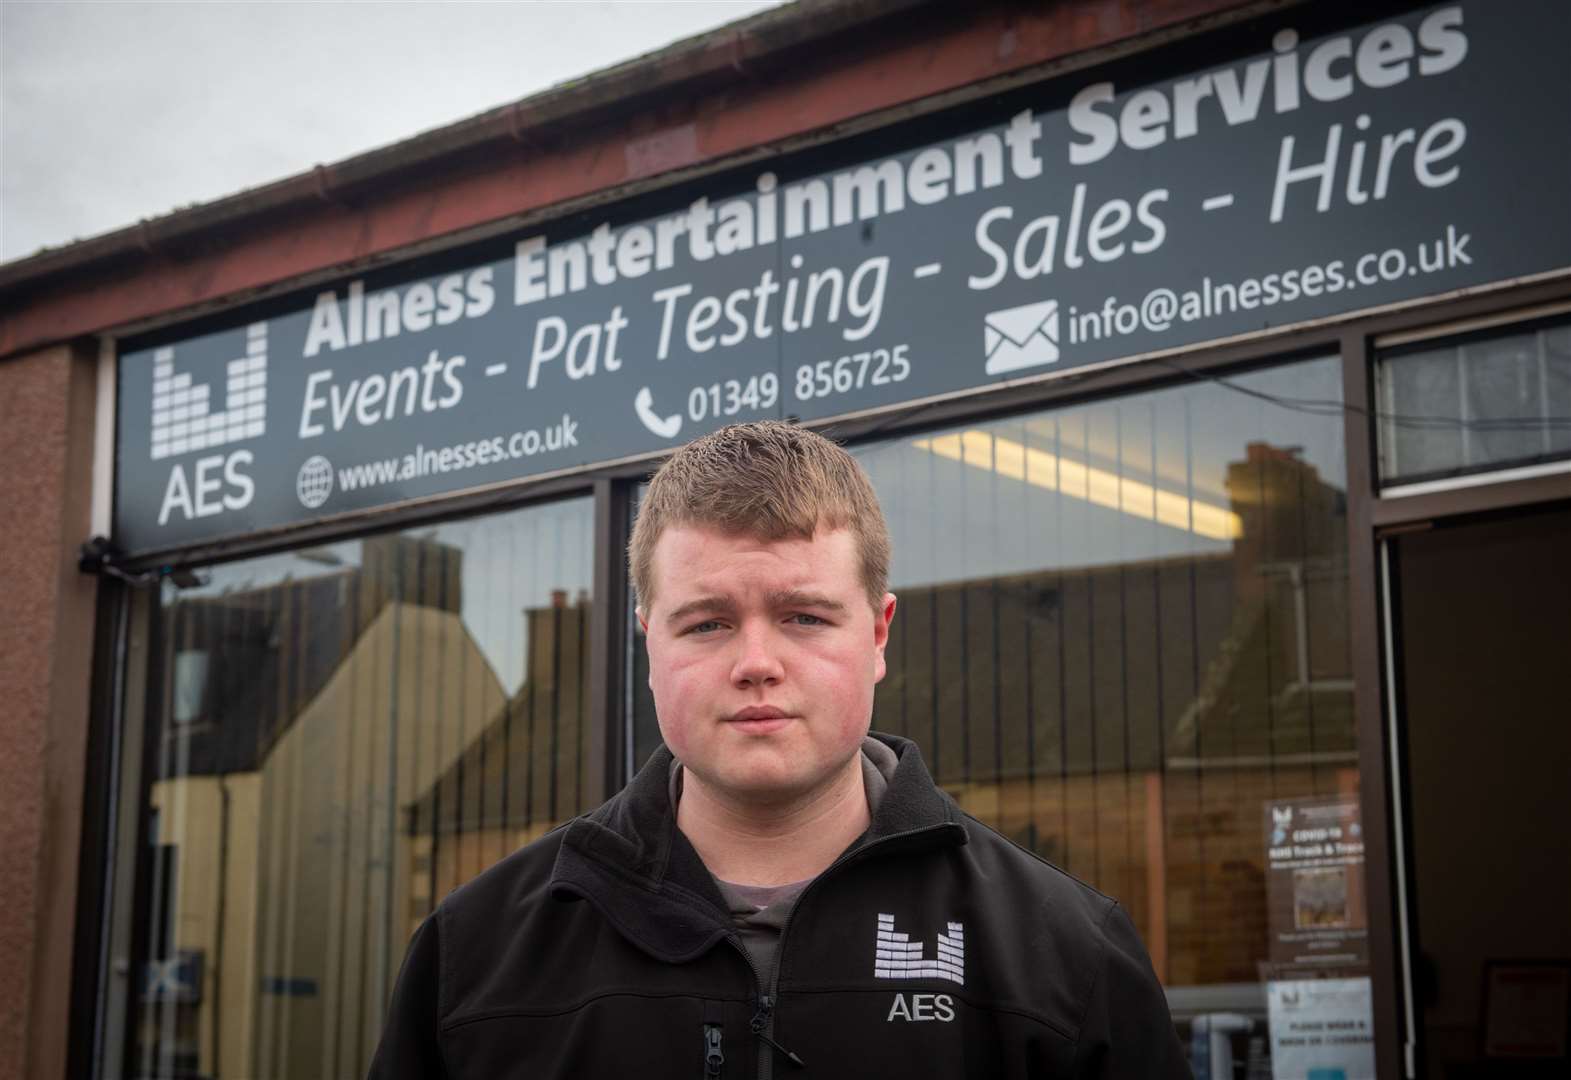 Ross-shire businessman hopes to keep Alness Entertainment Services afloat it is hit by the impact of Covid restrictions